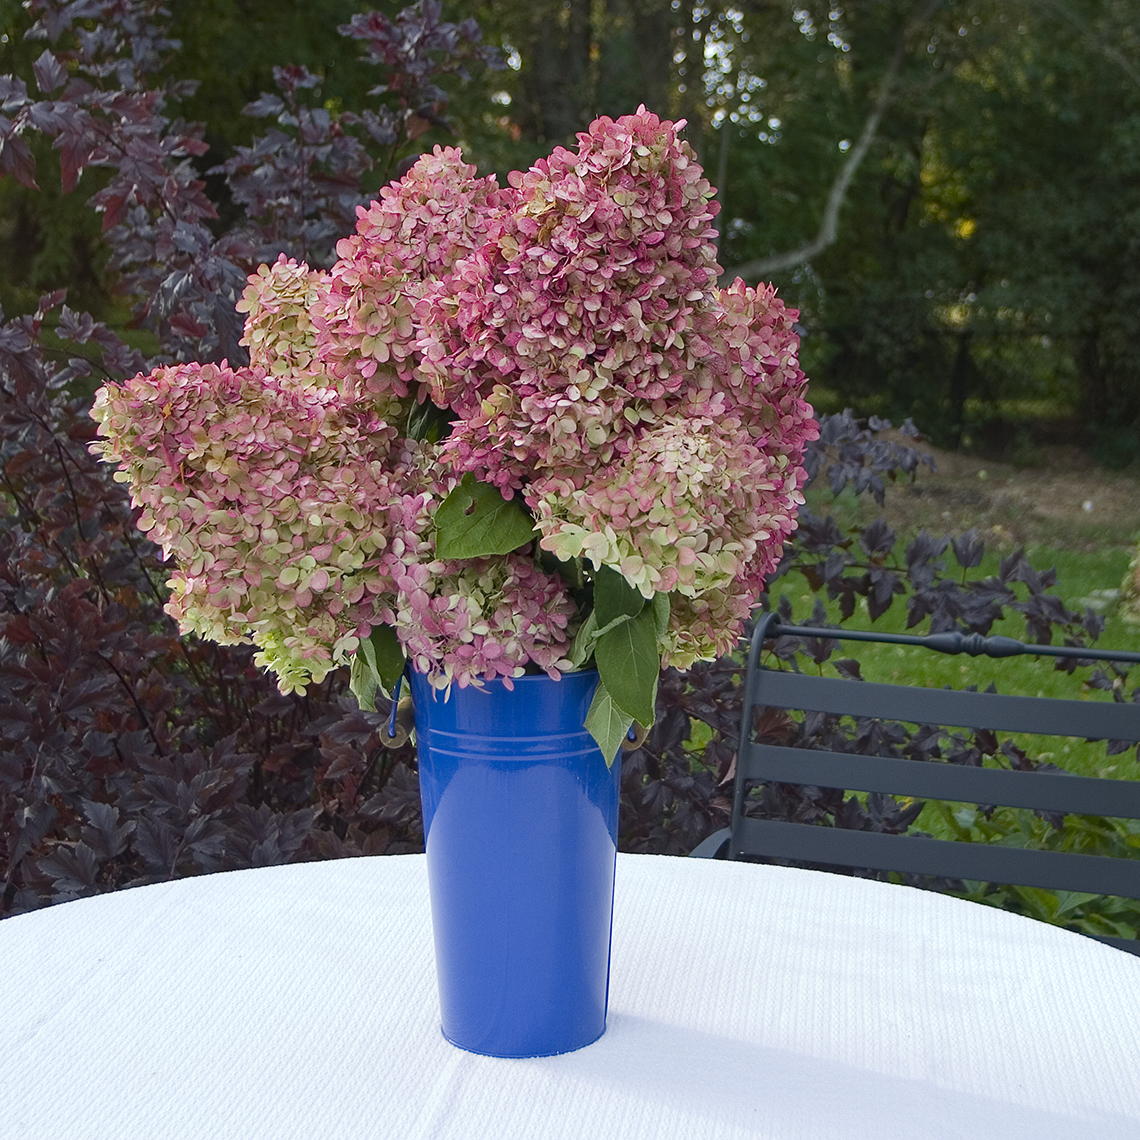 Limelight flowers in a vase showing the deep pink coloration they develop later in the growing season